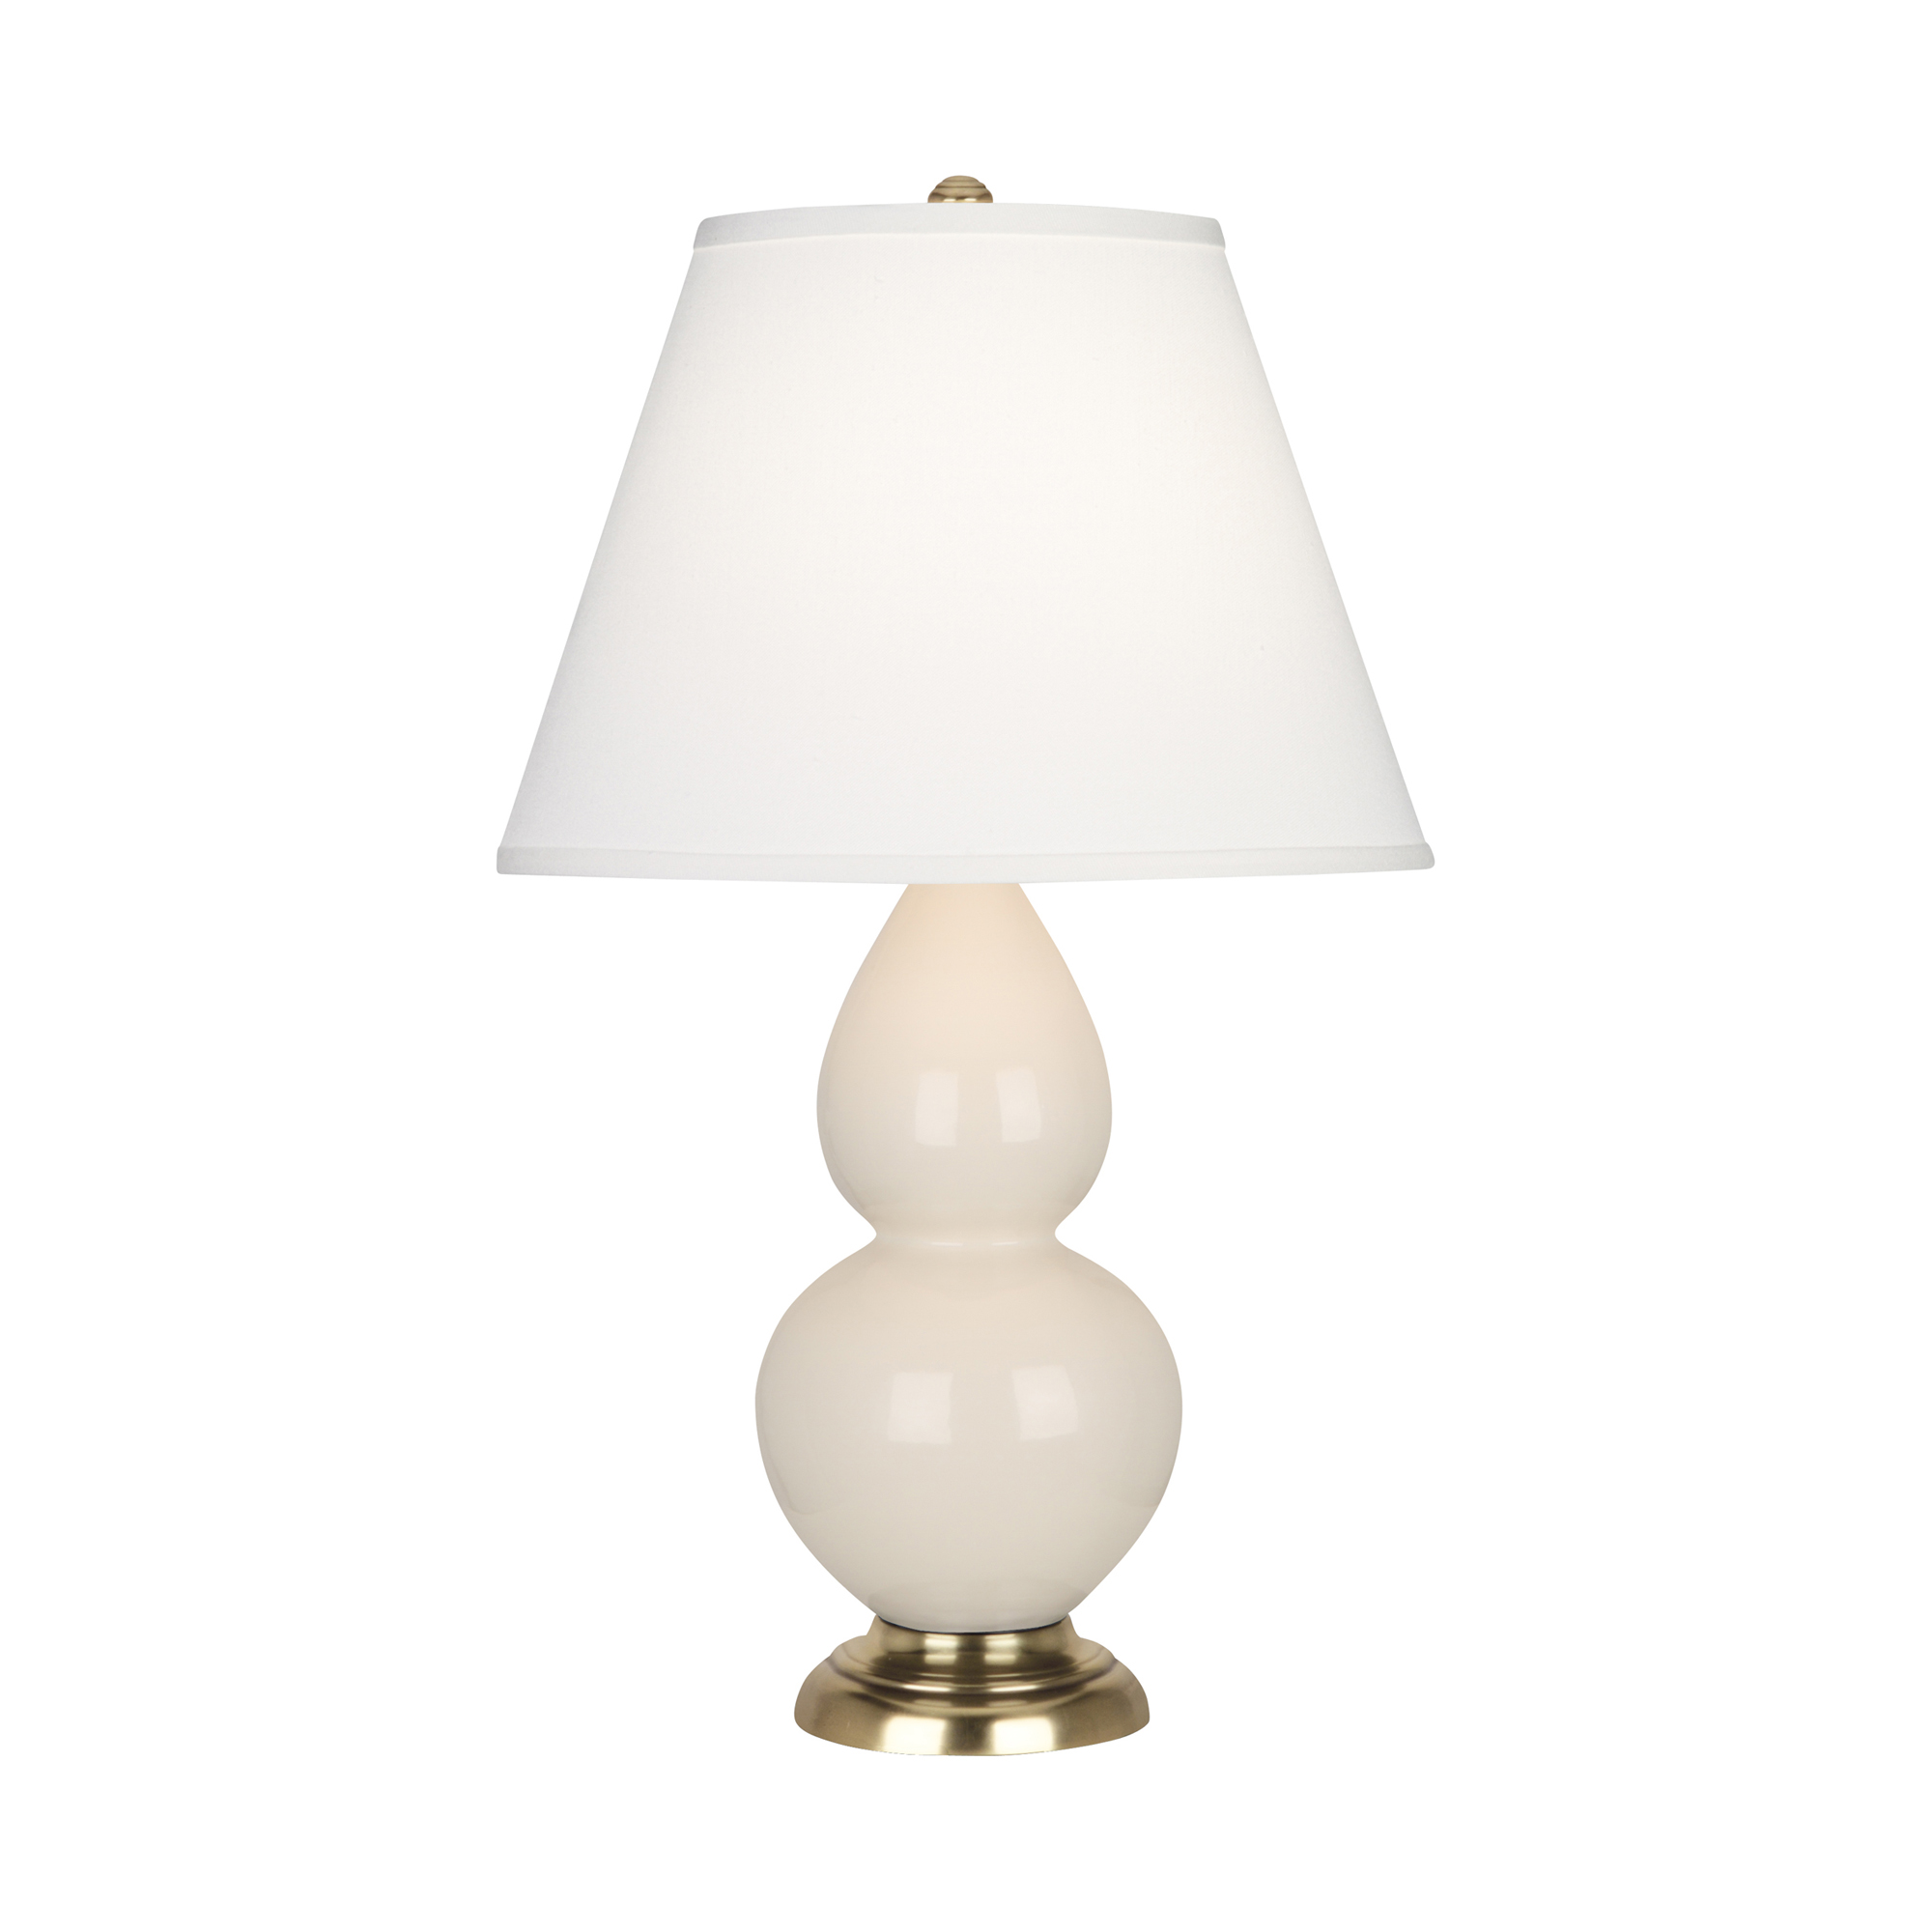 Small Double Gourd Accent Lamp Style #1774X